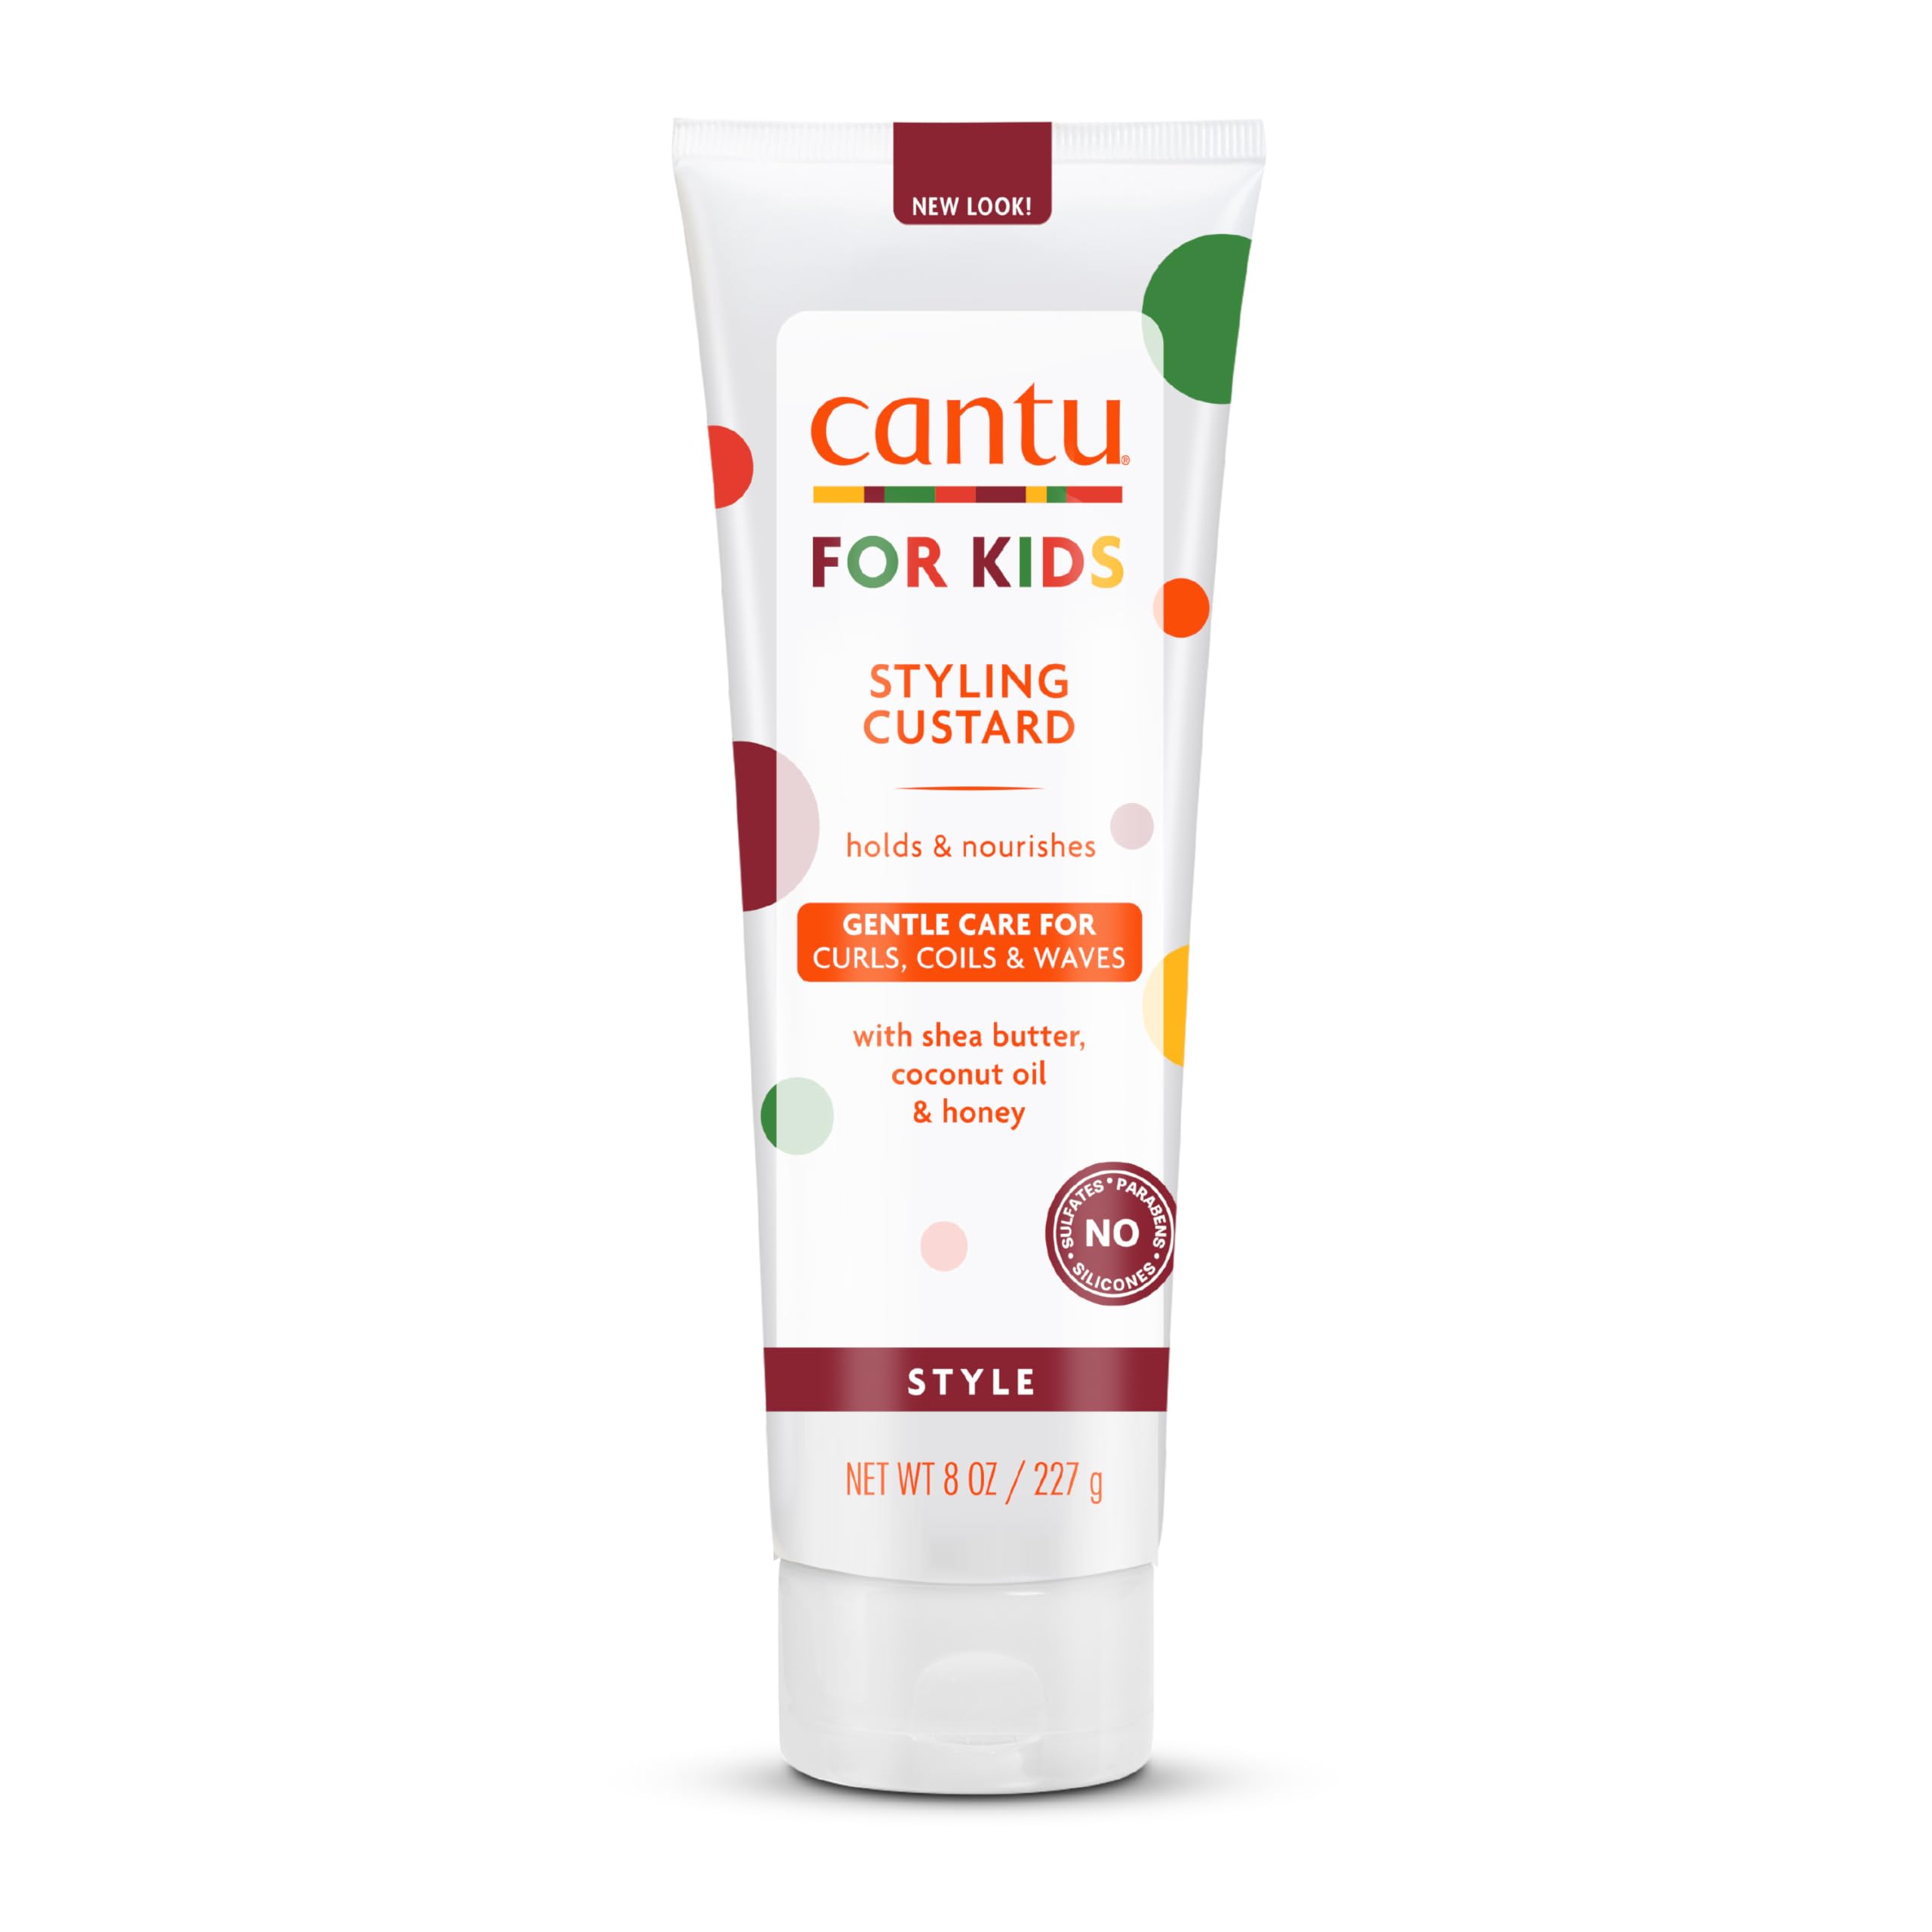 Cantu Care for Kid's Styling Custard - 227g